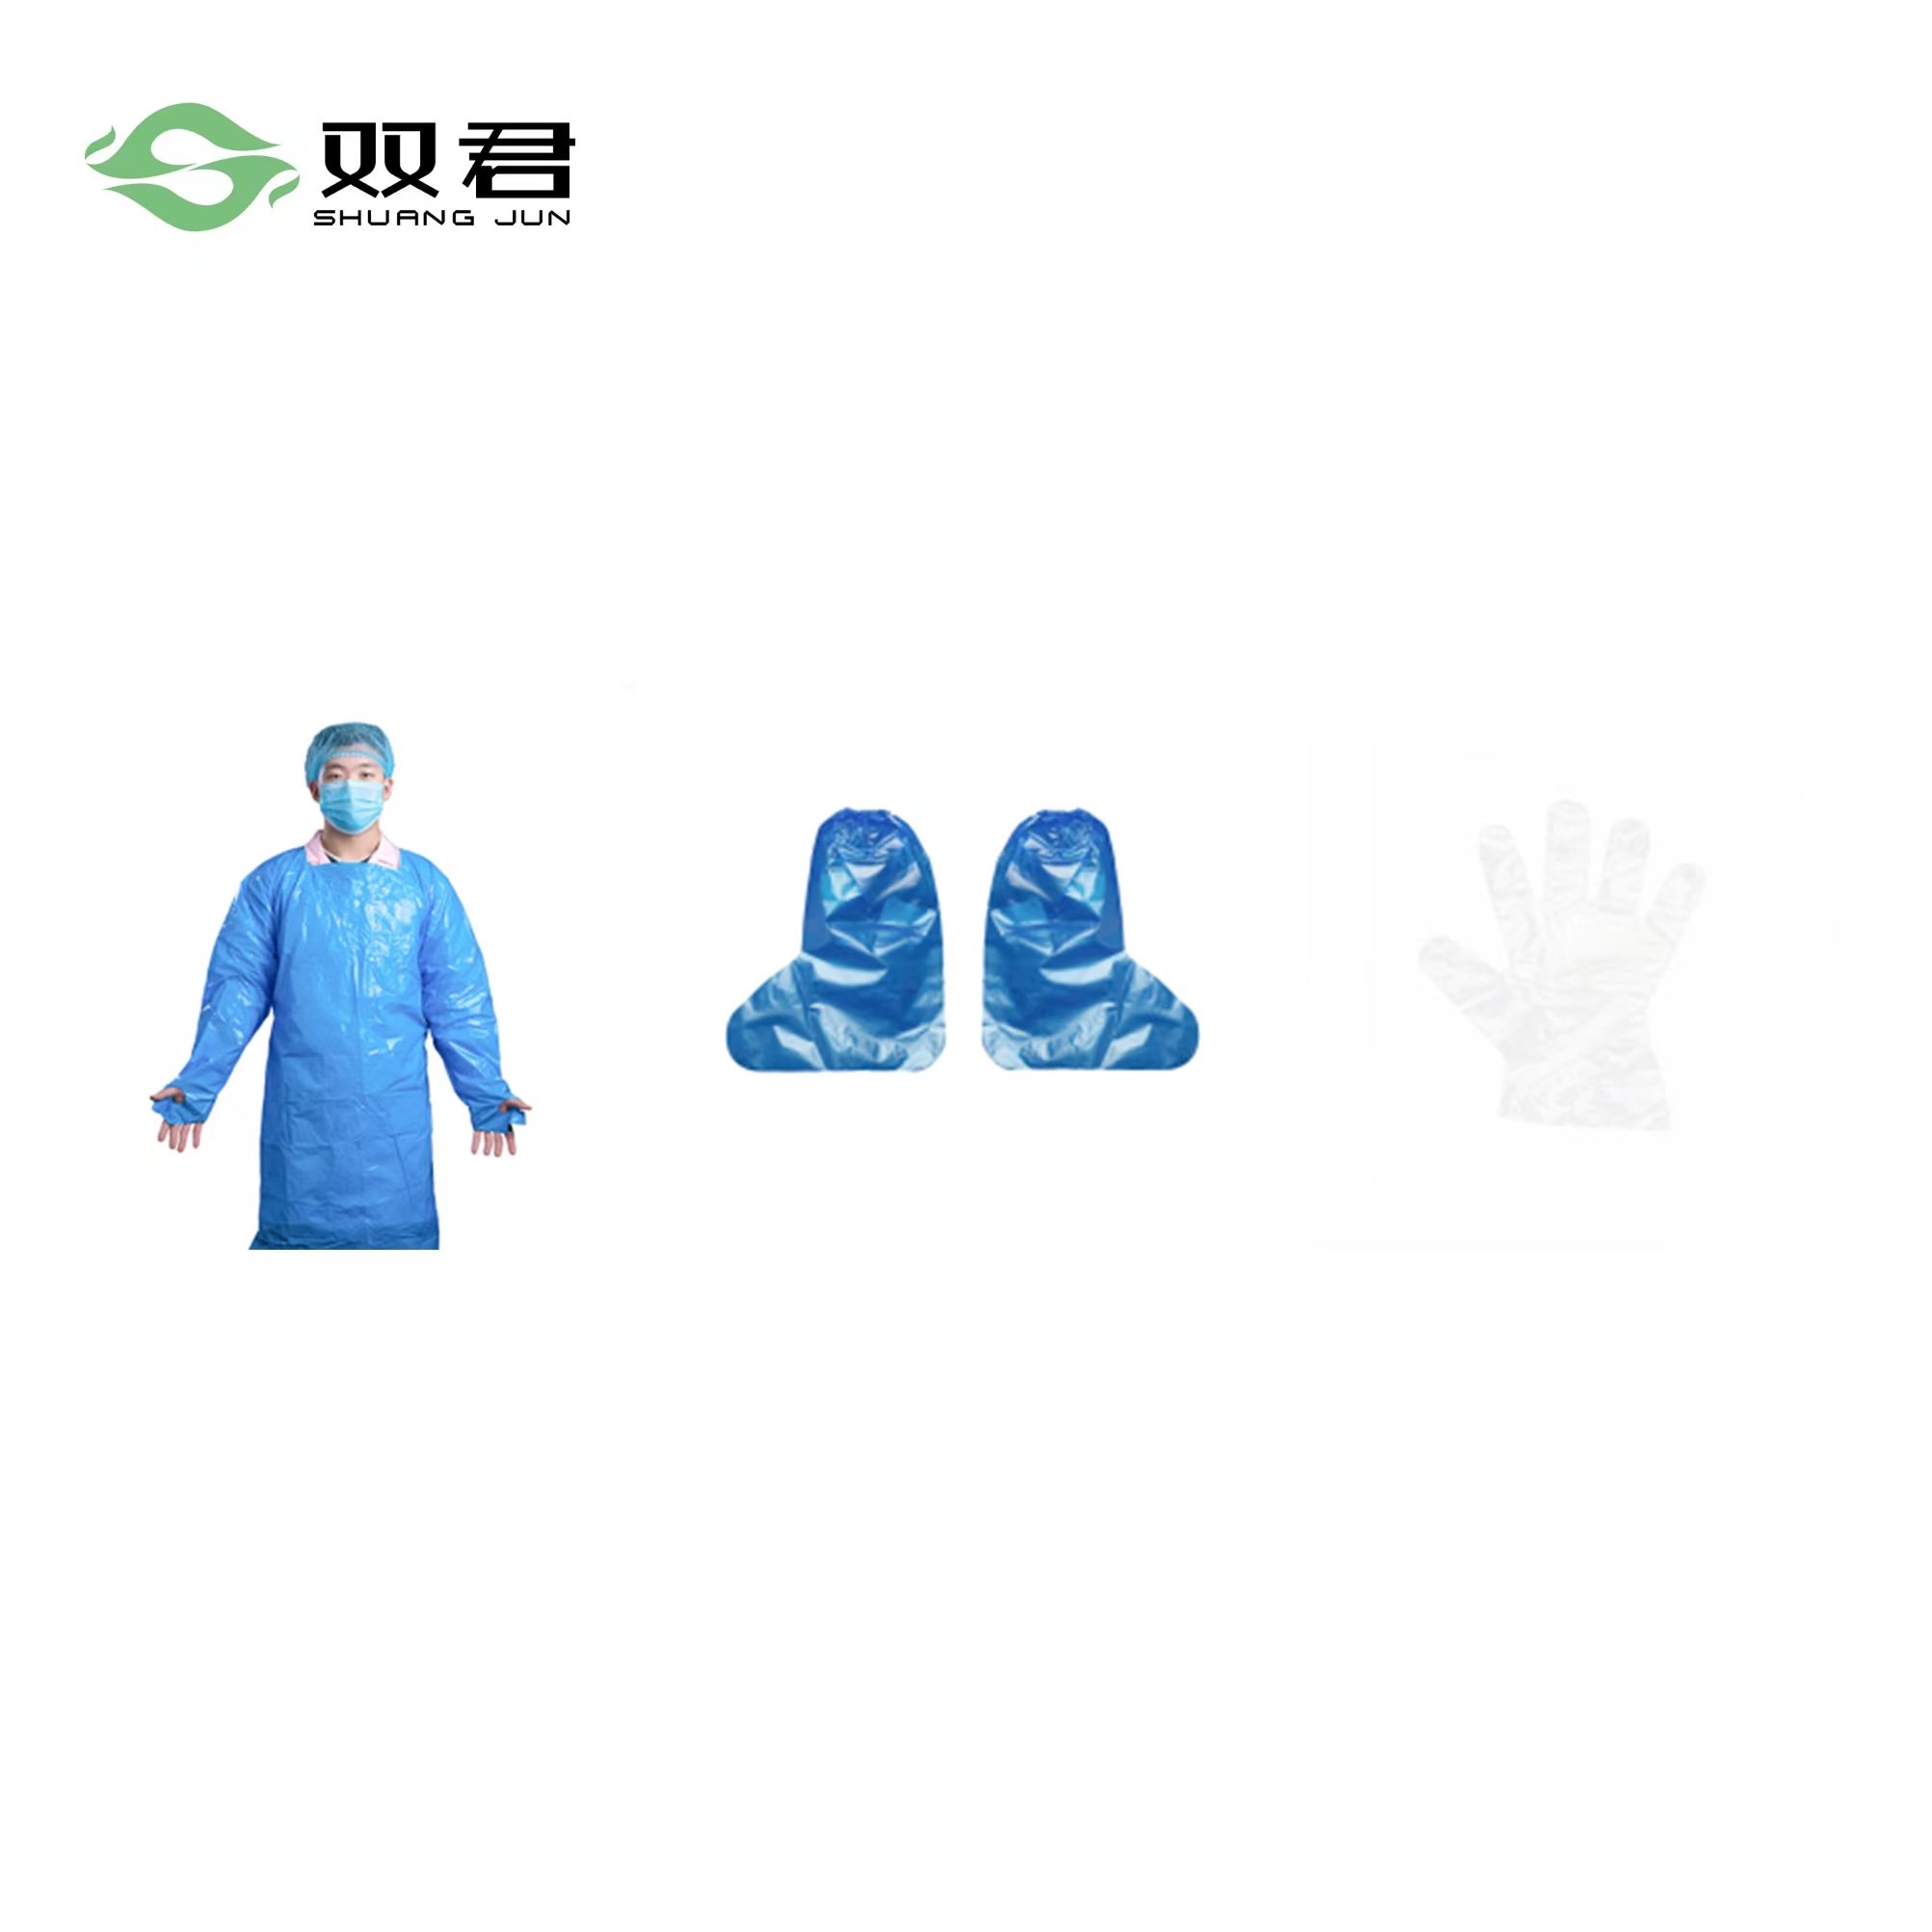 Medical isolation gown, medical glove, medical boot cover Featured Image